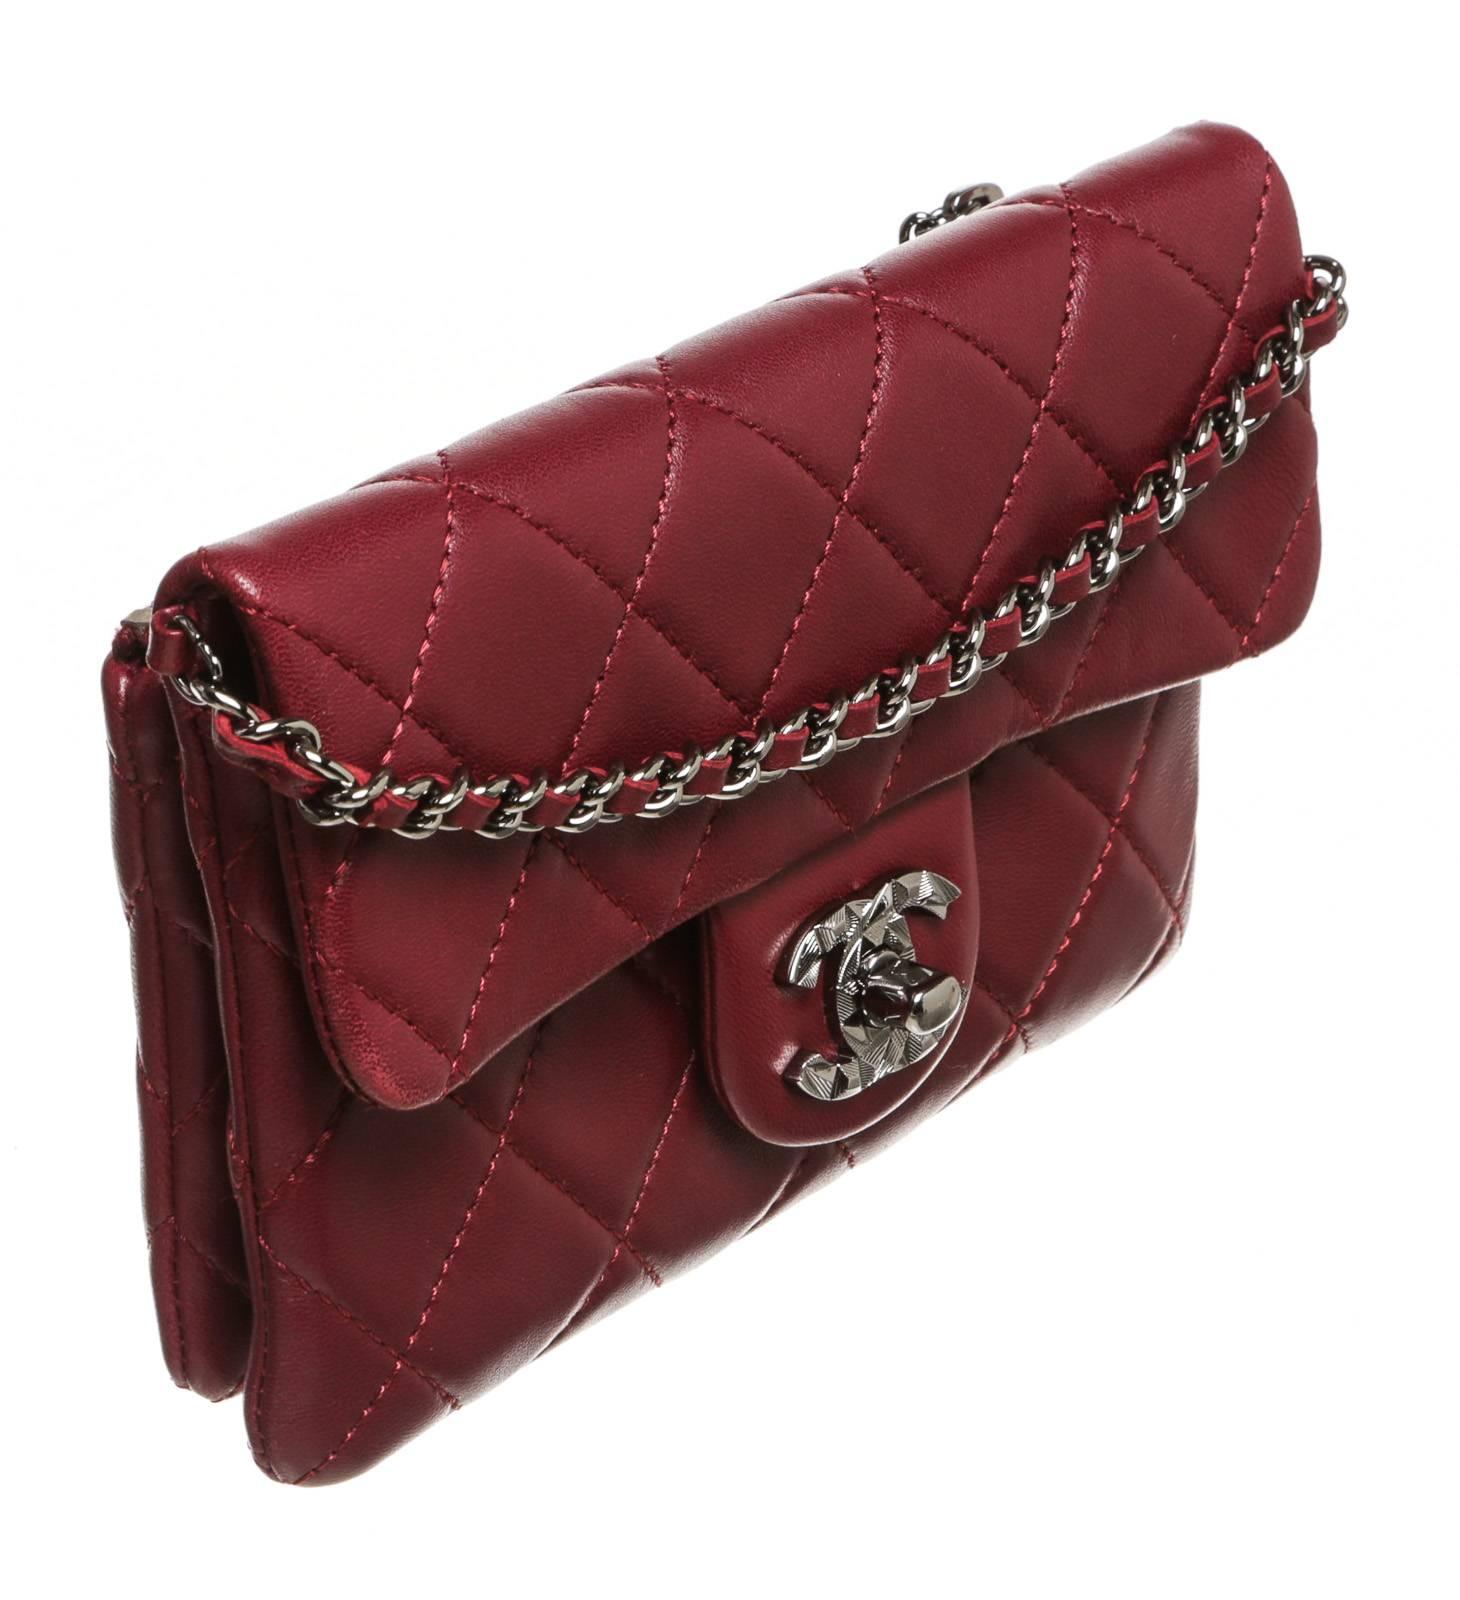 Show off your inner fashionista with a stunning crossbody from Chanel! It closes in a flap style as a CC rests in the front atop the snap closure. A chain link strap weaves a leather that is also found in the interior lining.This adorable bag can